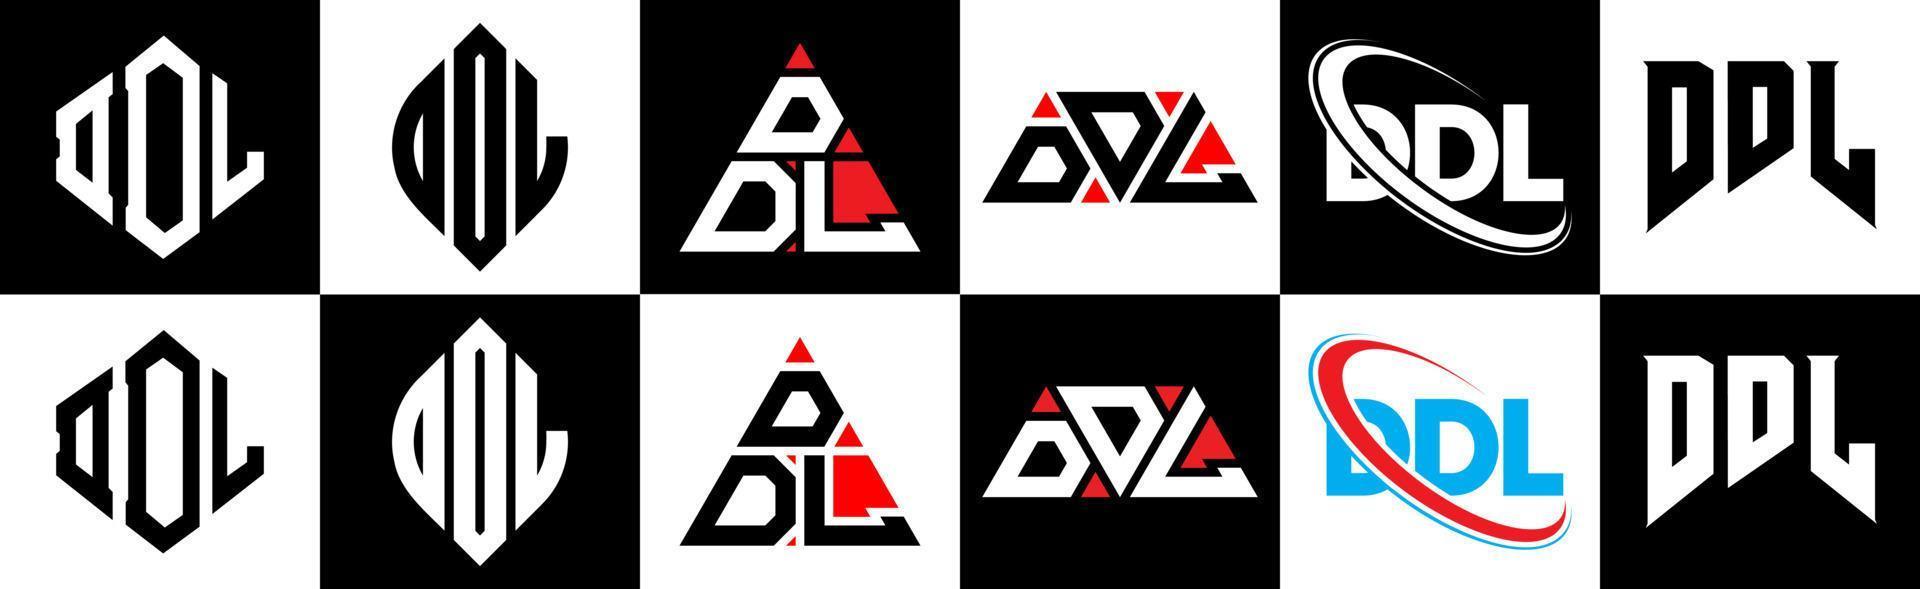 DDL letter logo design in six style. DDL polygon, circle, triangle, hexagon, flat and simple style with black and white color variation letter logo set in one artboard. DDL minimalist and classic logo vector